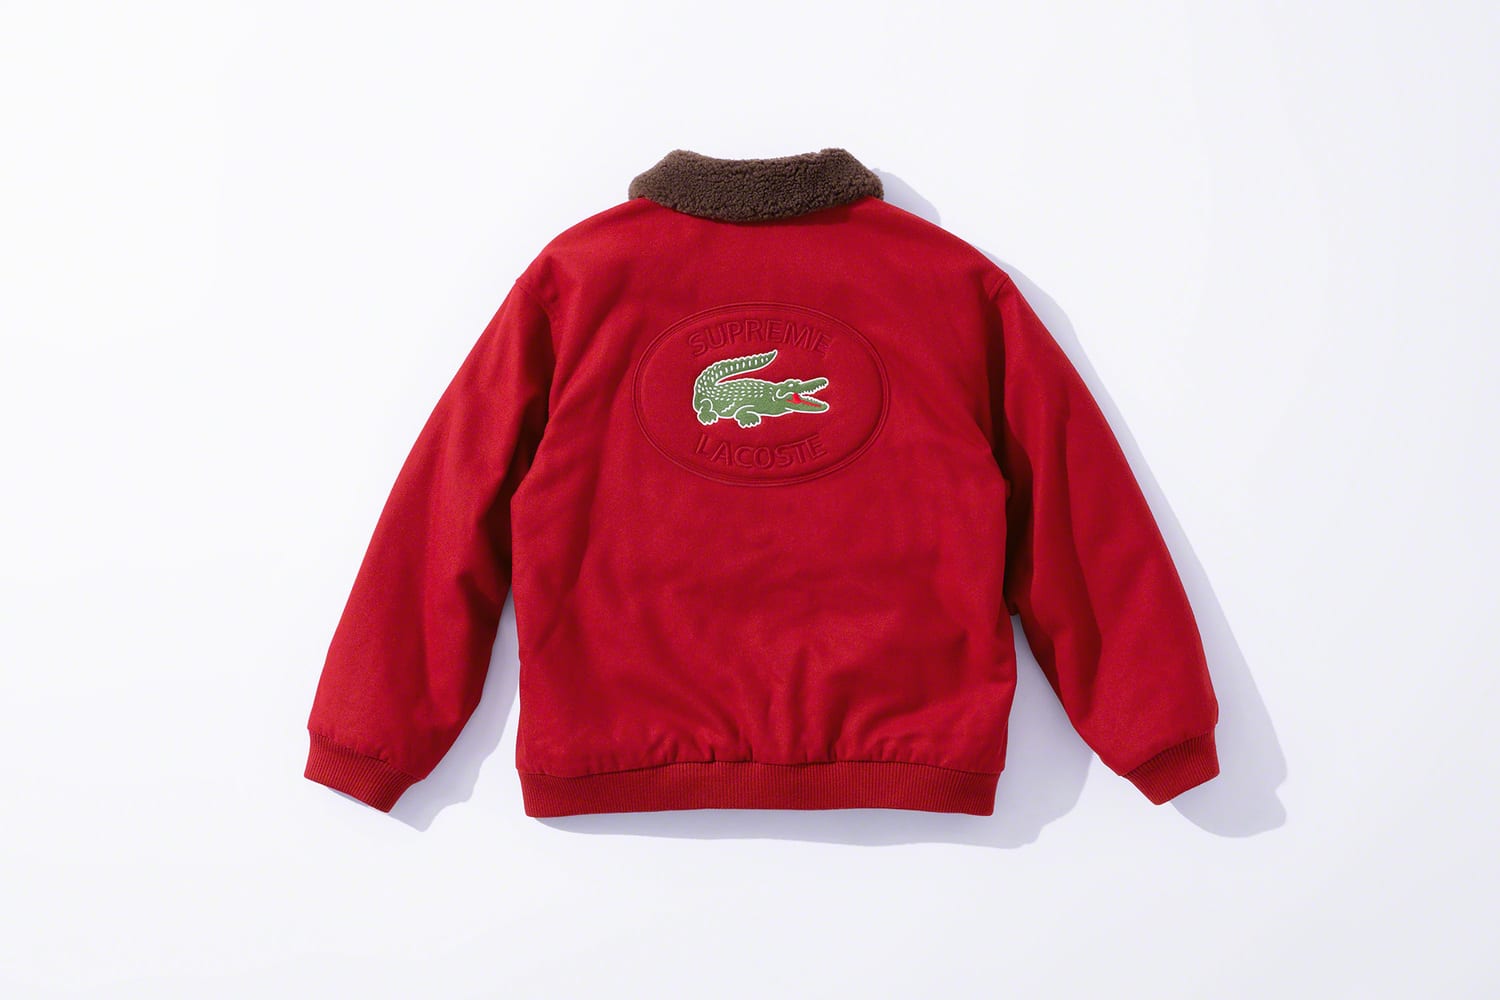 Supreme & LACOSTE Join For a Fire Fall 2019 Collaboration | The Source